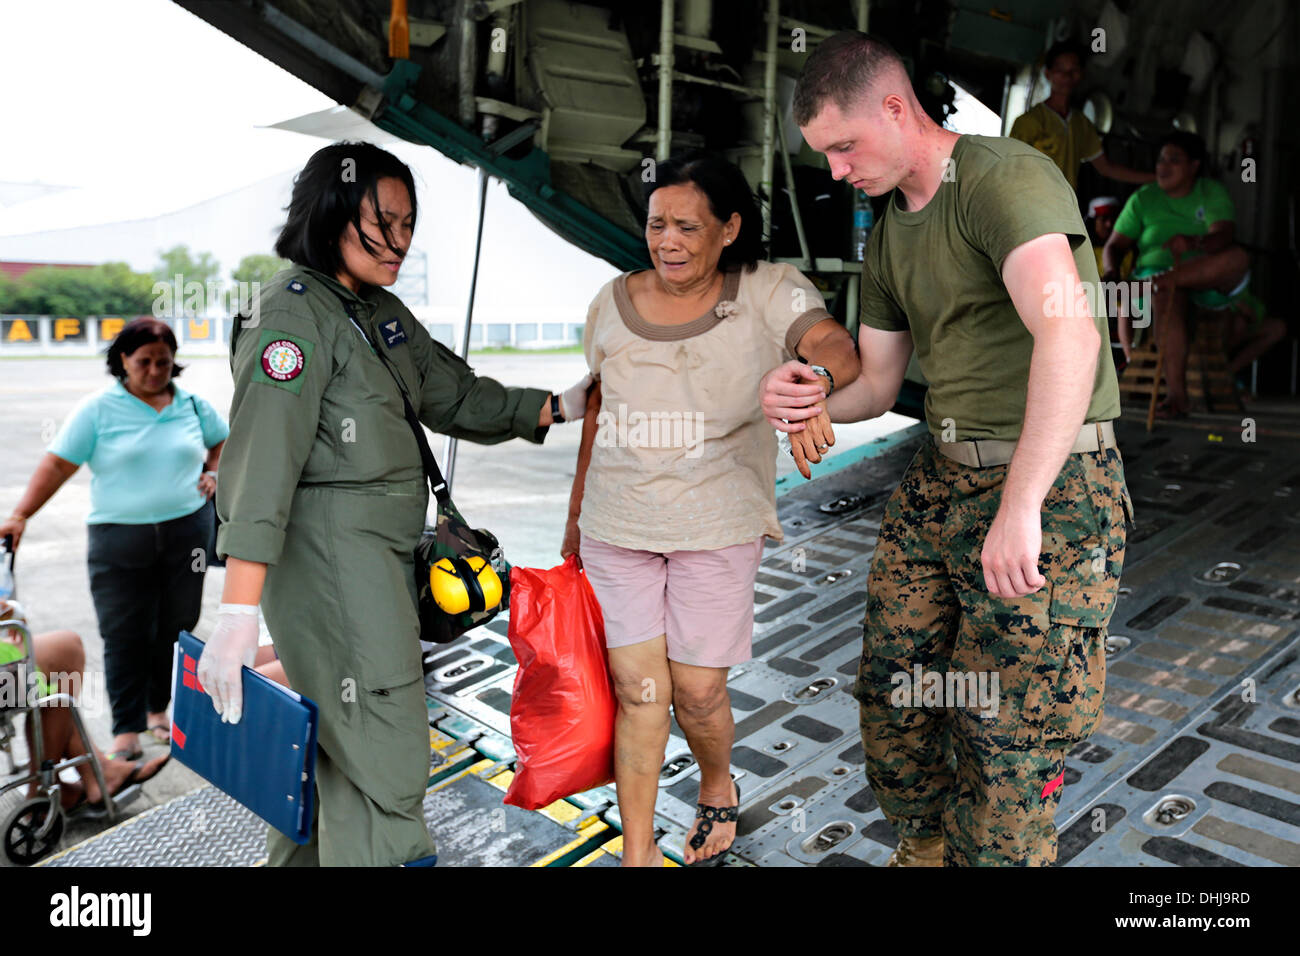 US Marines assist an injured Filipina woman off the back of a KC-130J Super Hercules transport aircraft at Villamor Air Base November 11, 2013 in Manila, The Philippines. The U.S. has joined relief efforts following the devastation caused by Super Typhoon Haiyan which is believed to have killed 10,000 people across the Philippine Islands. Stock Photo